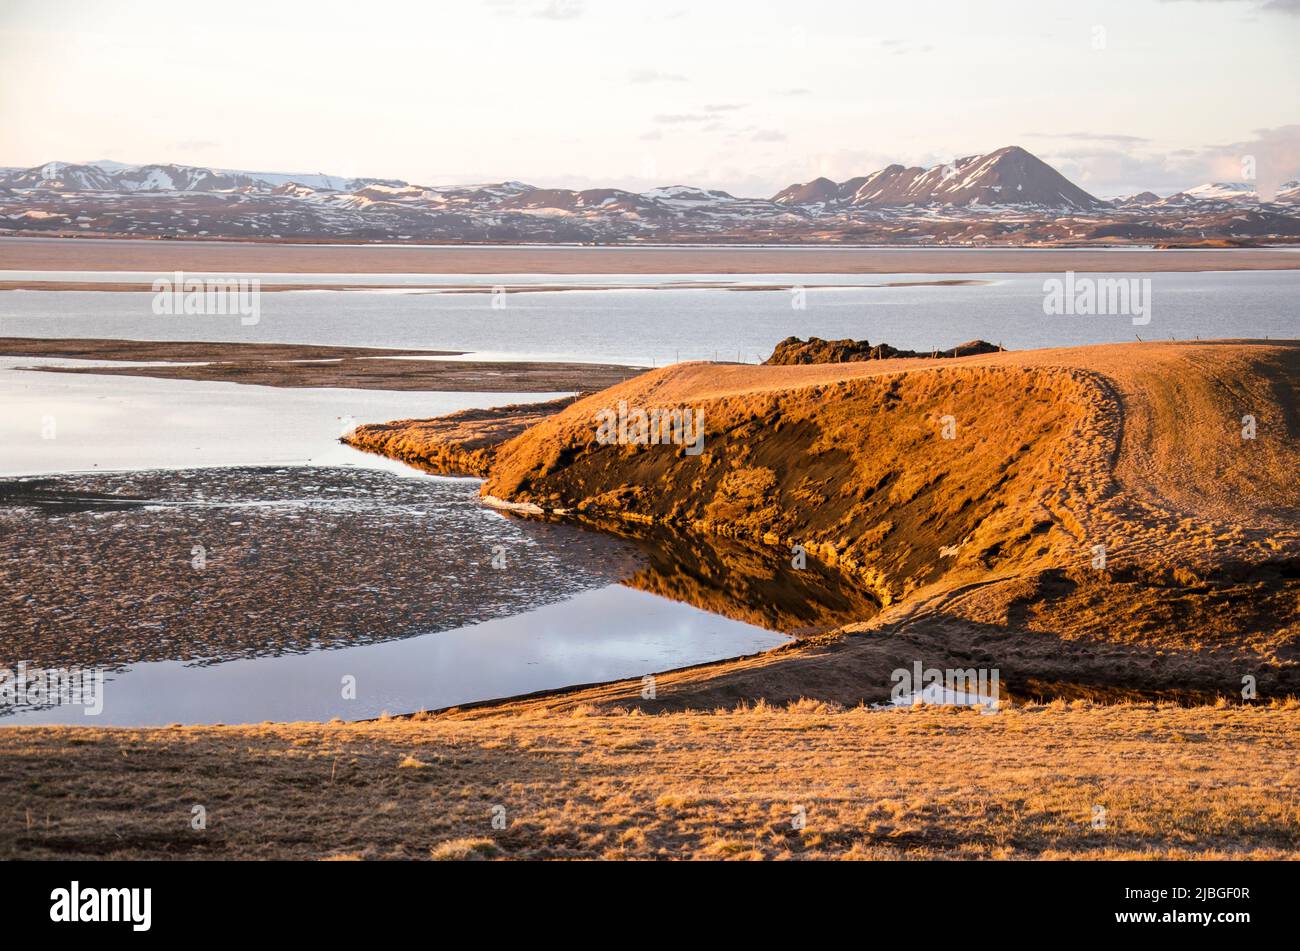 Skútustaðir, Iceland, April 27, 2022: view from an elevated position towards lake Myvatn and the volcanic landscape around it Stock Photo